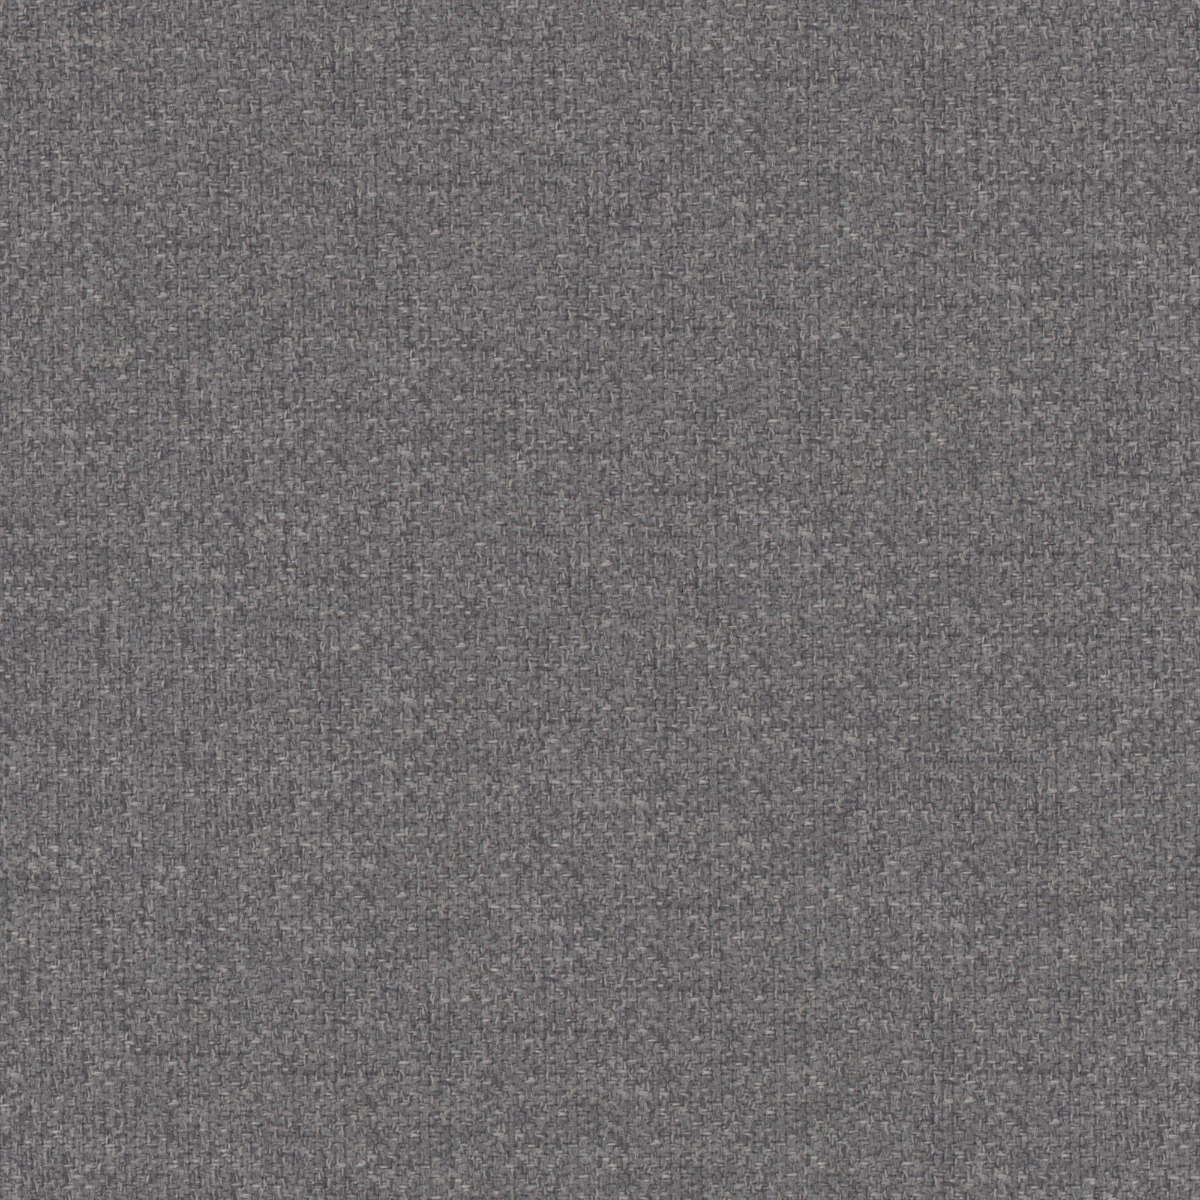 A seamless fabric texture with plain grey texture units arranged in a None pattern